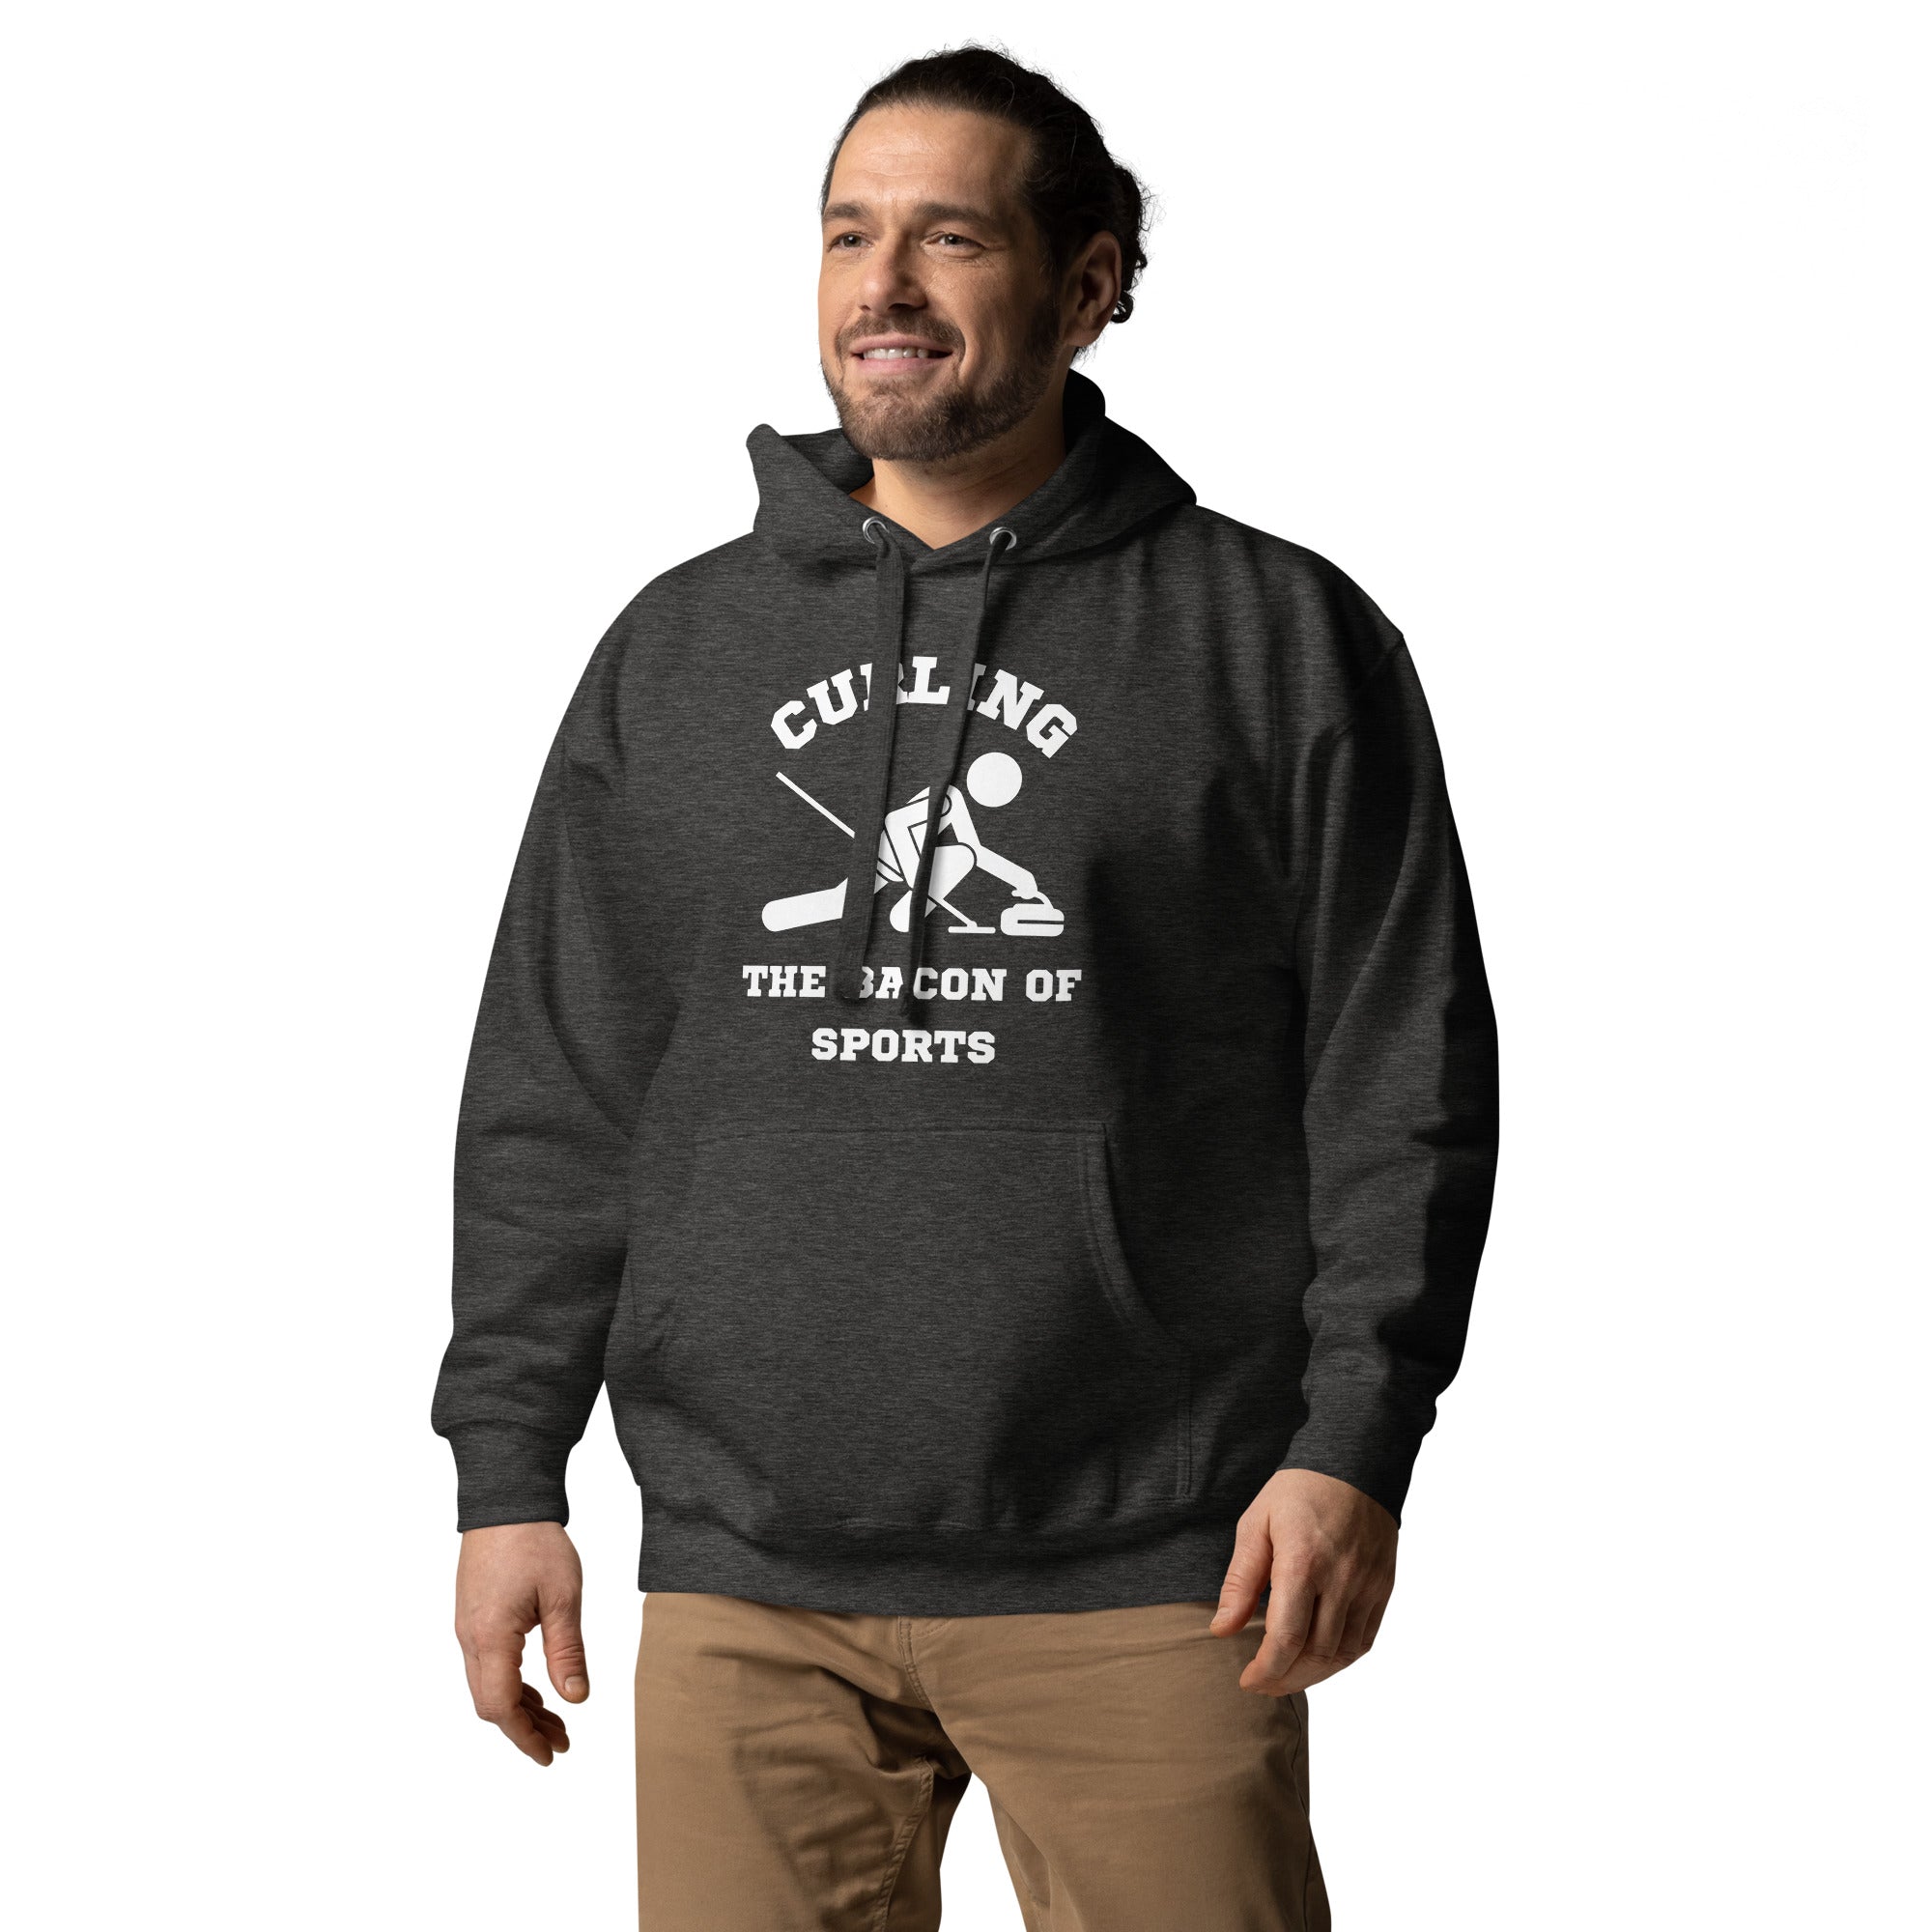 Curling The Bacon Of Sports Men's Heavy Hoodie